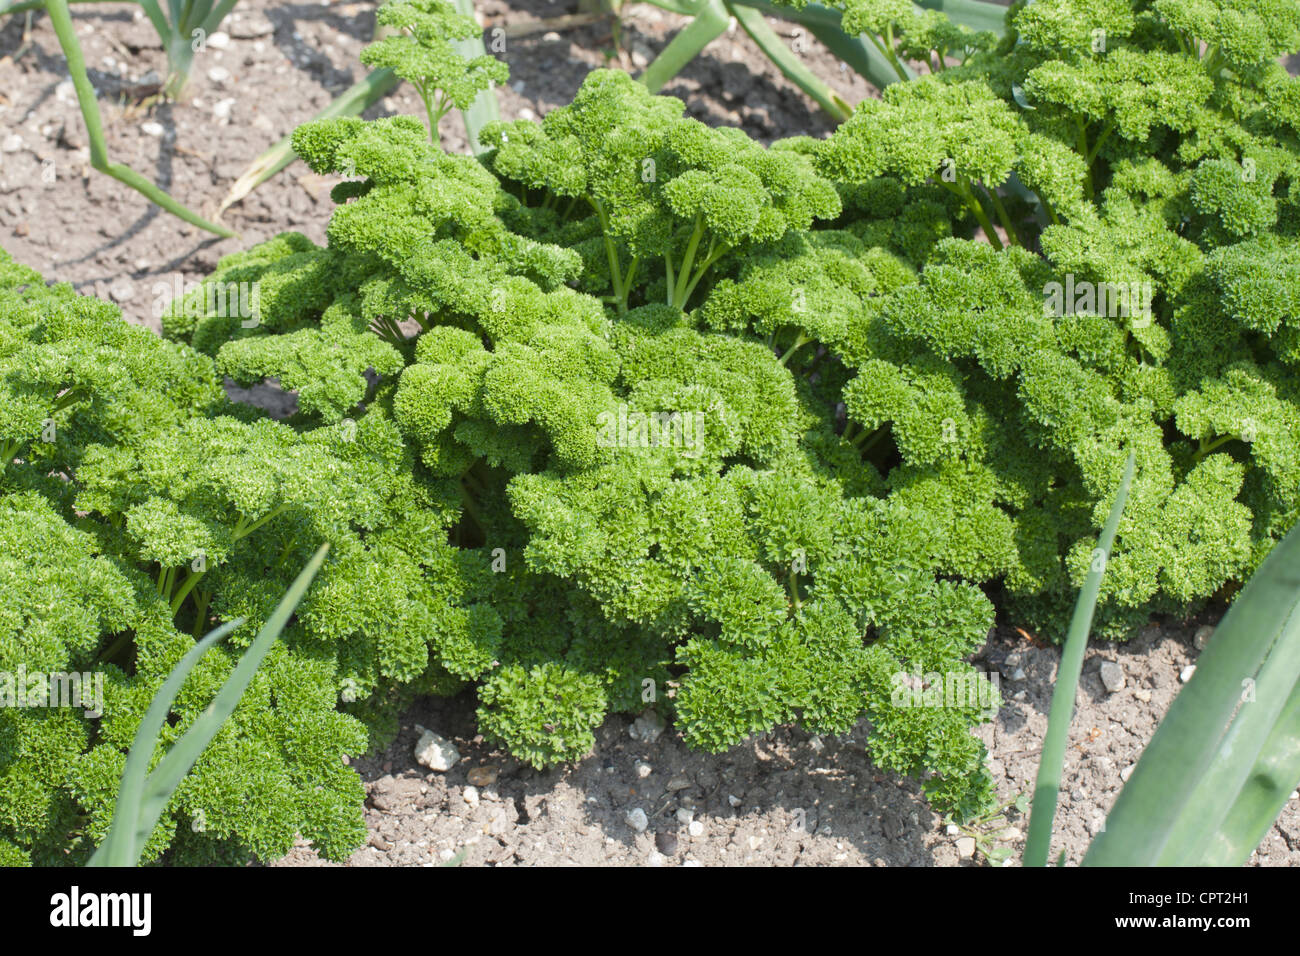 Garden - curly leaf parsley Stock Photo